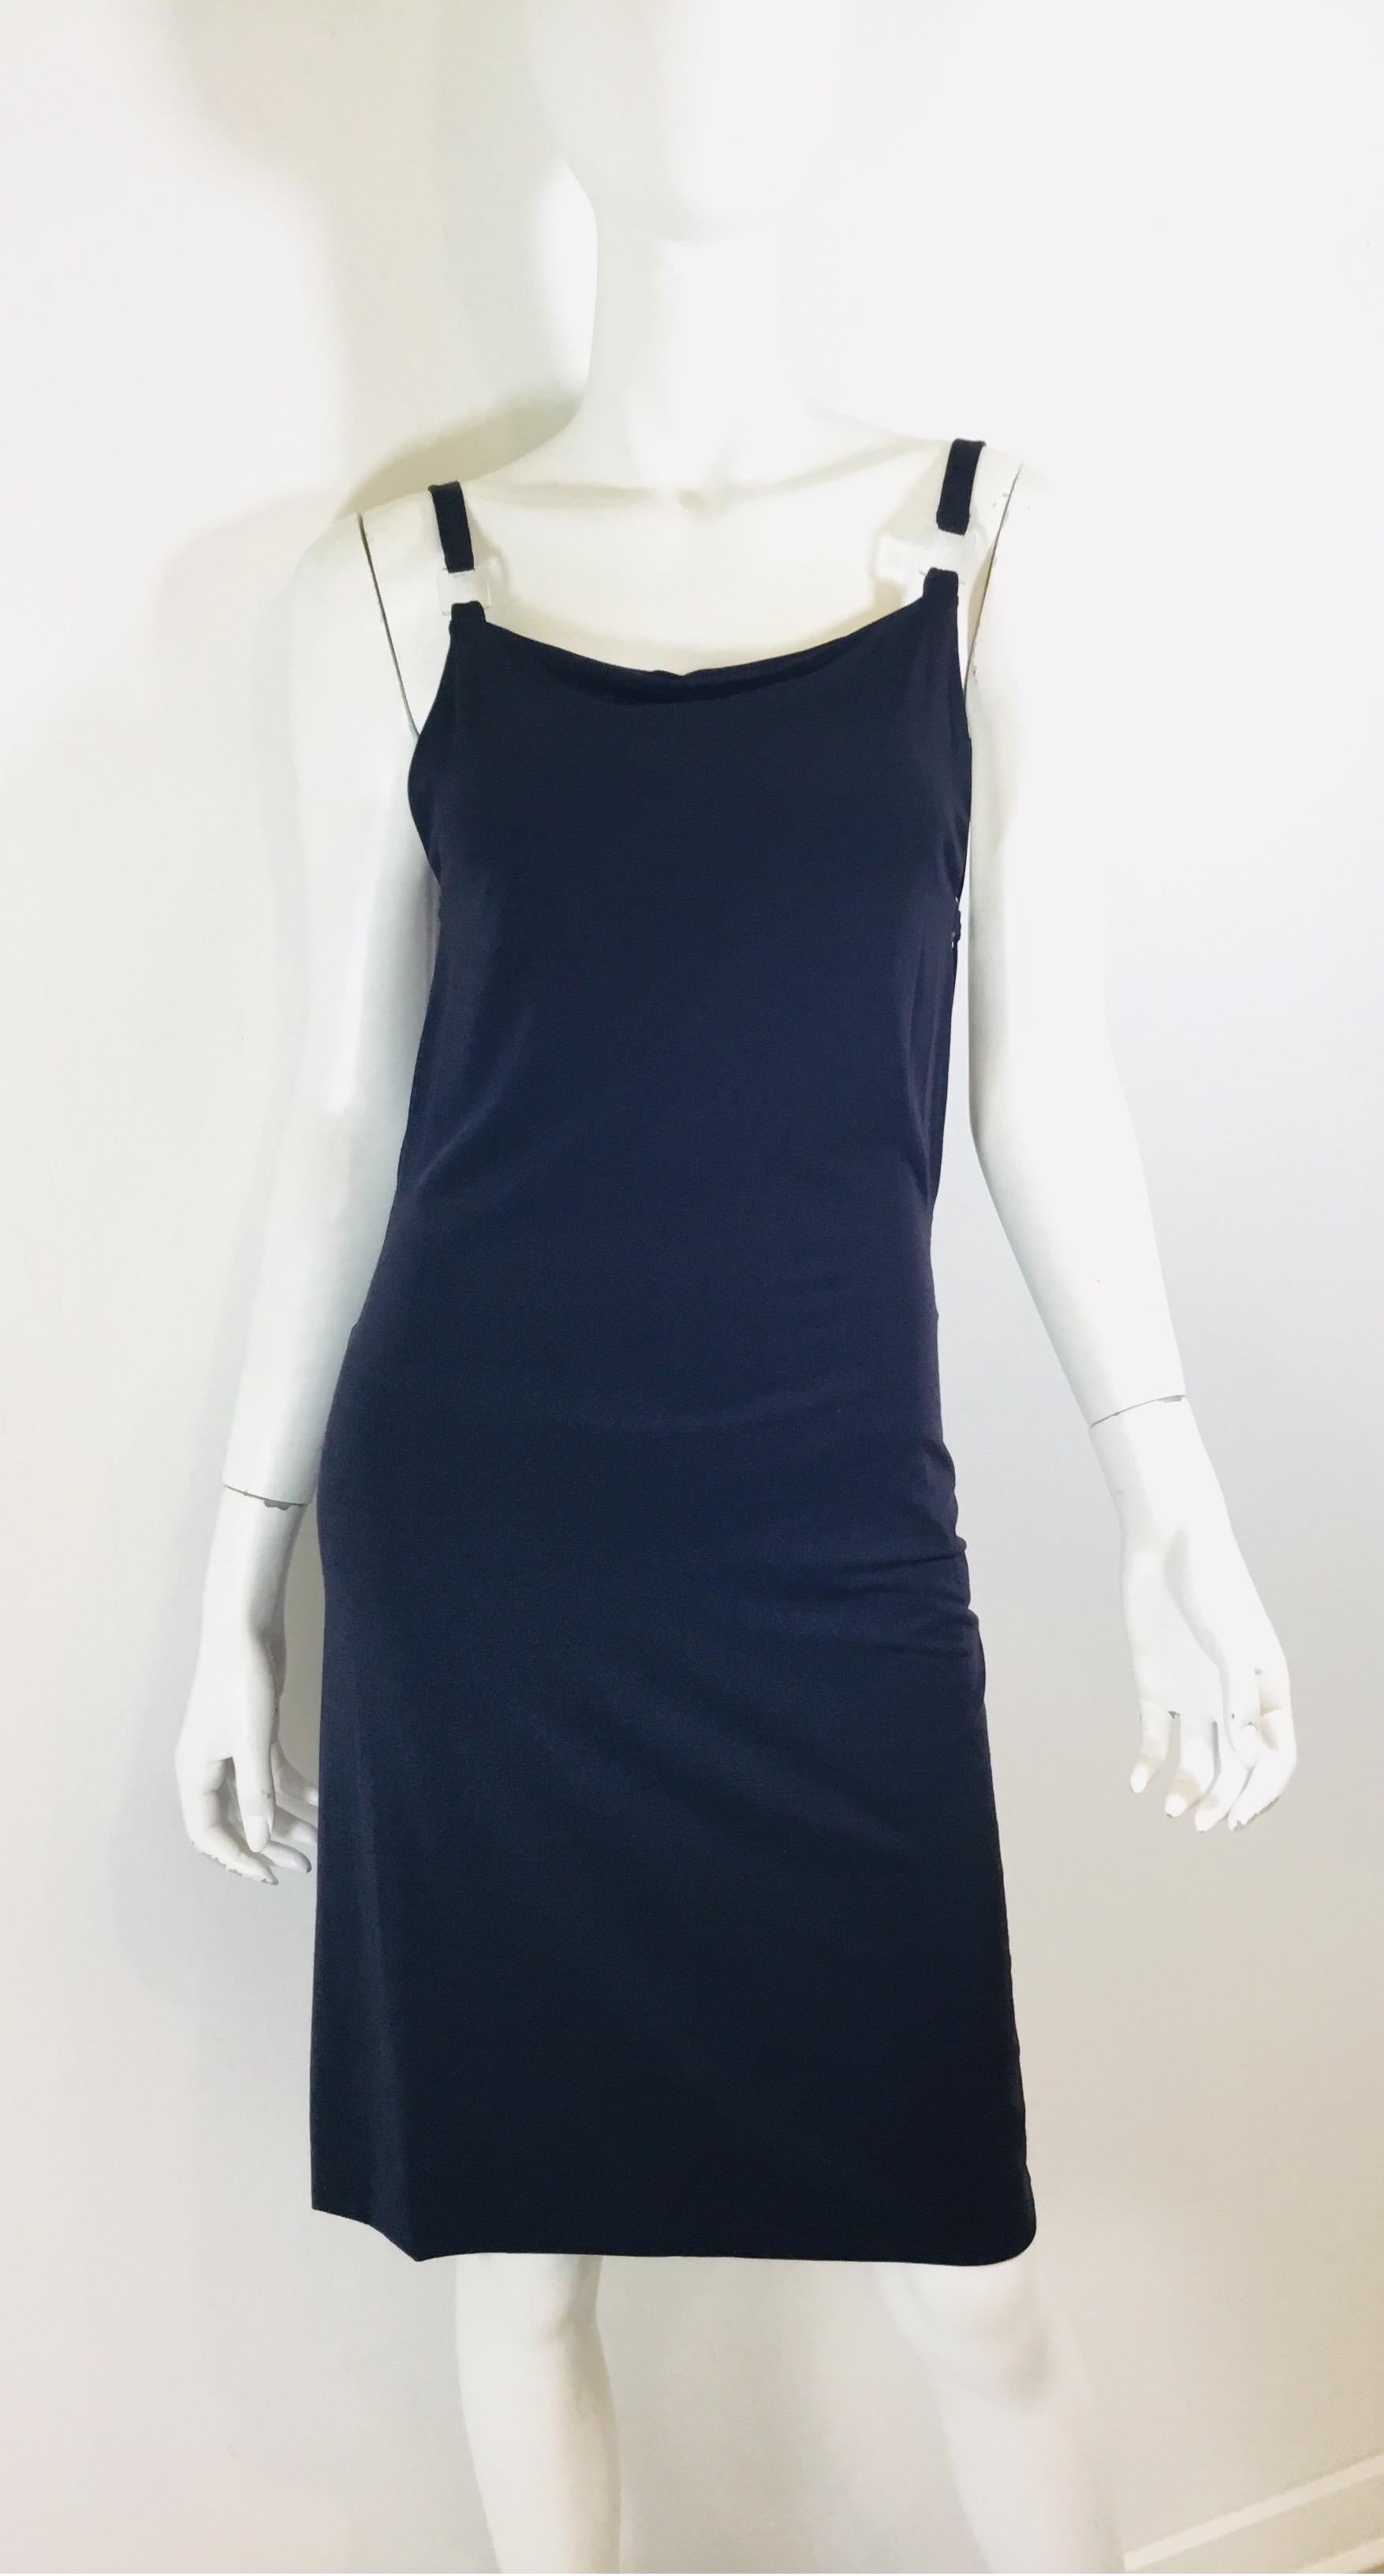 Fendi Dress is featured in a navy colored jersey knit with clear Lucite blocks attaching the shoulder straps and cutout side panels. Dress is a size 40, made in Italy.

Measurements:
Bust 28”
Waist 29”
Hips 31”
Length 35”
*jersey fabric has generous